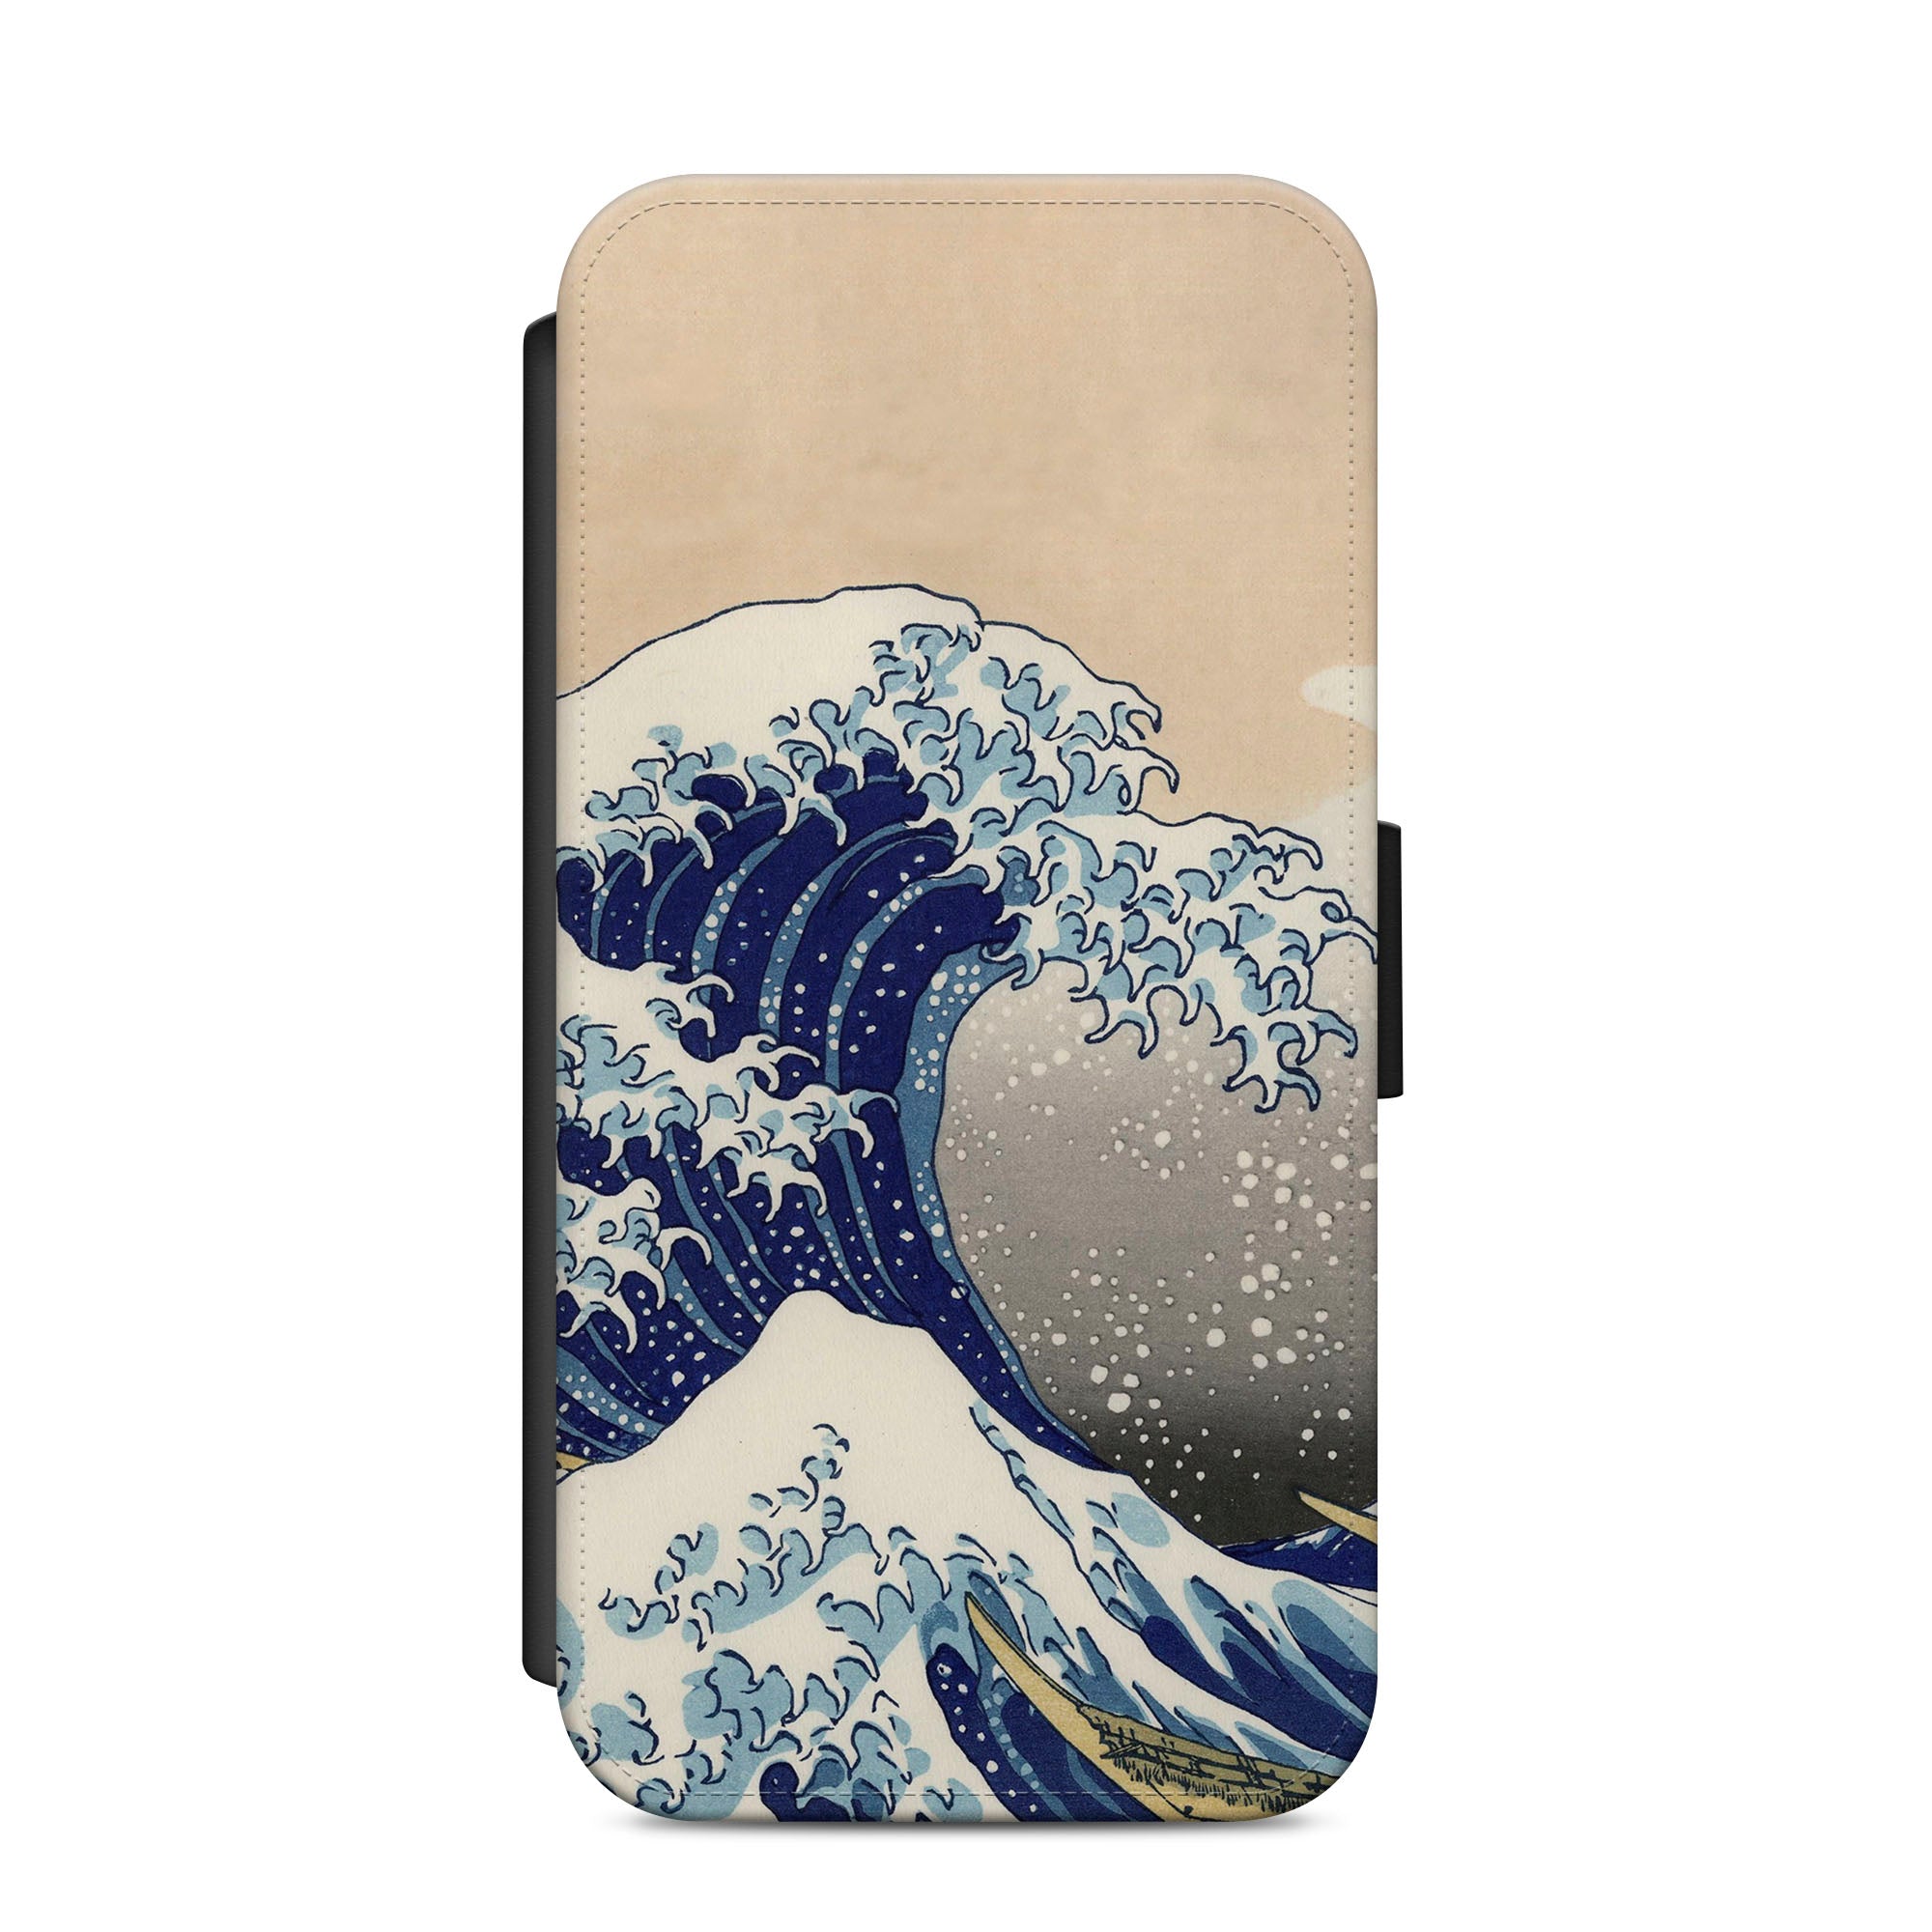 Great Wave Of Kanagawa Faux Leather Flip Case Wallet for iPhone / Samsung